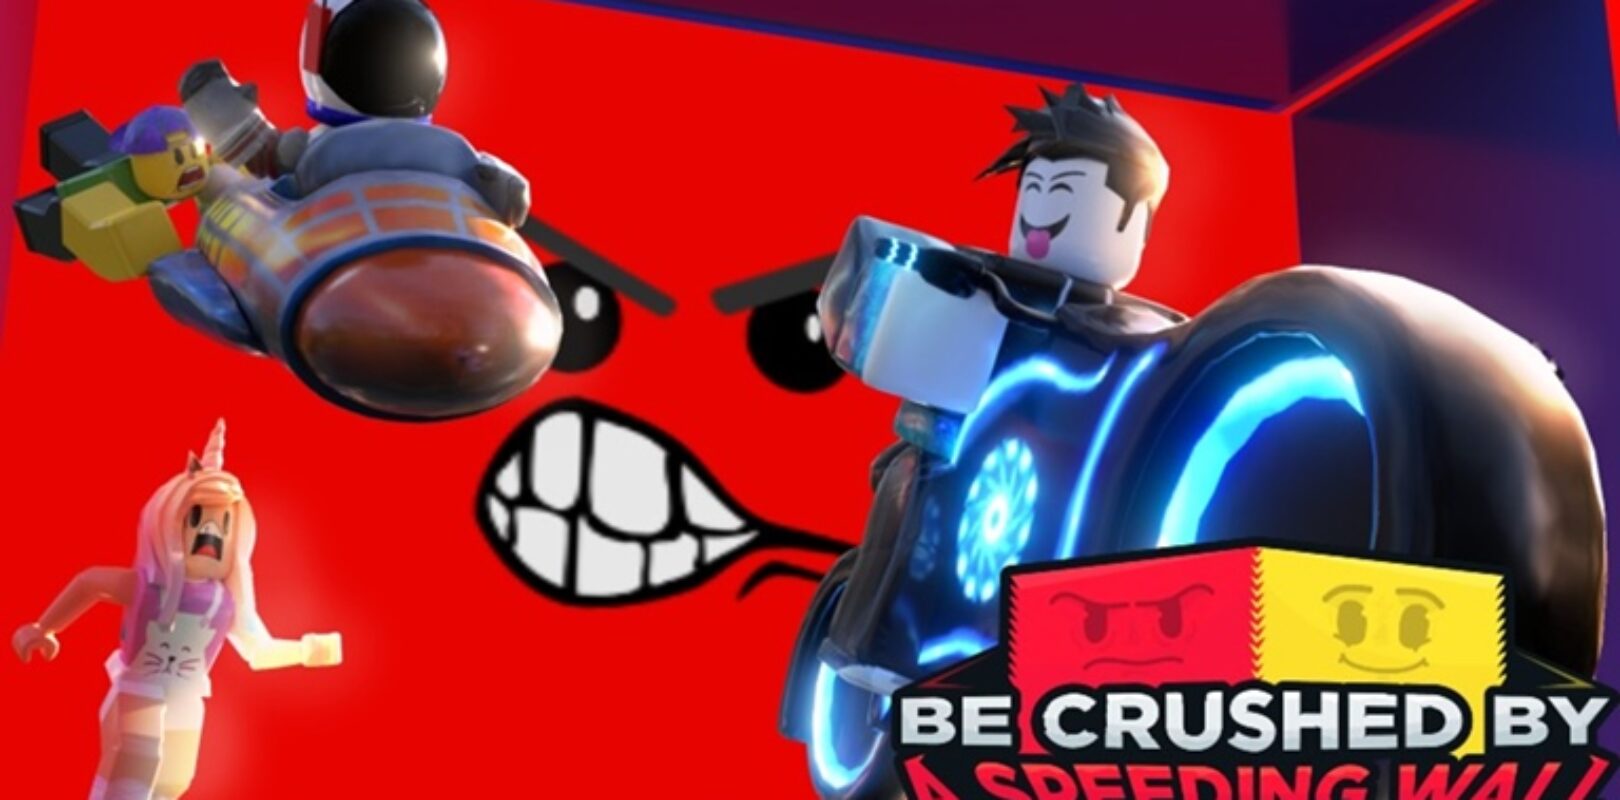 Be Crushed By A Speeding Wall Codes 2020 Pivotal Gamers - be crushed by a speeding wall roblox